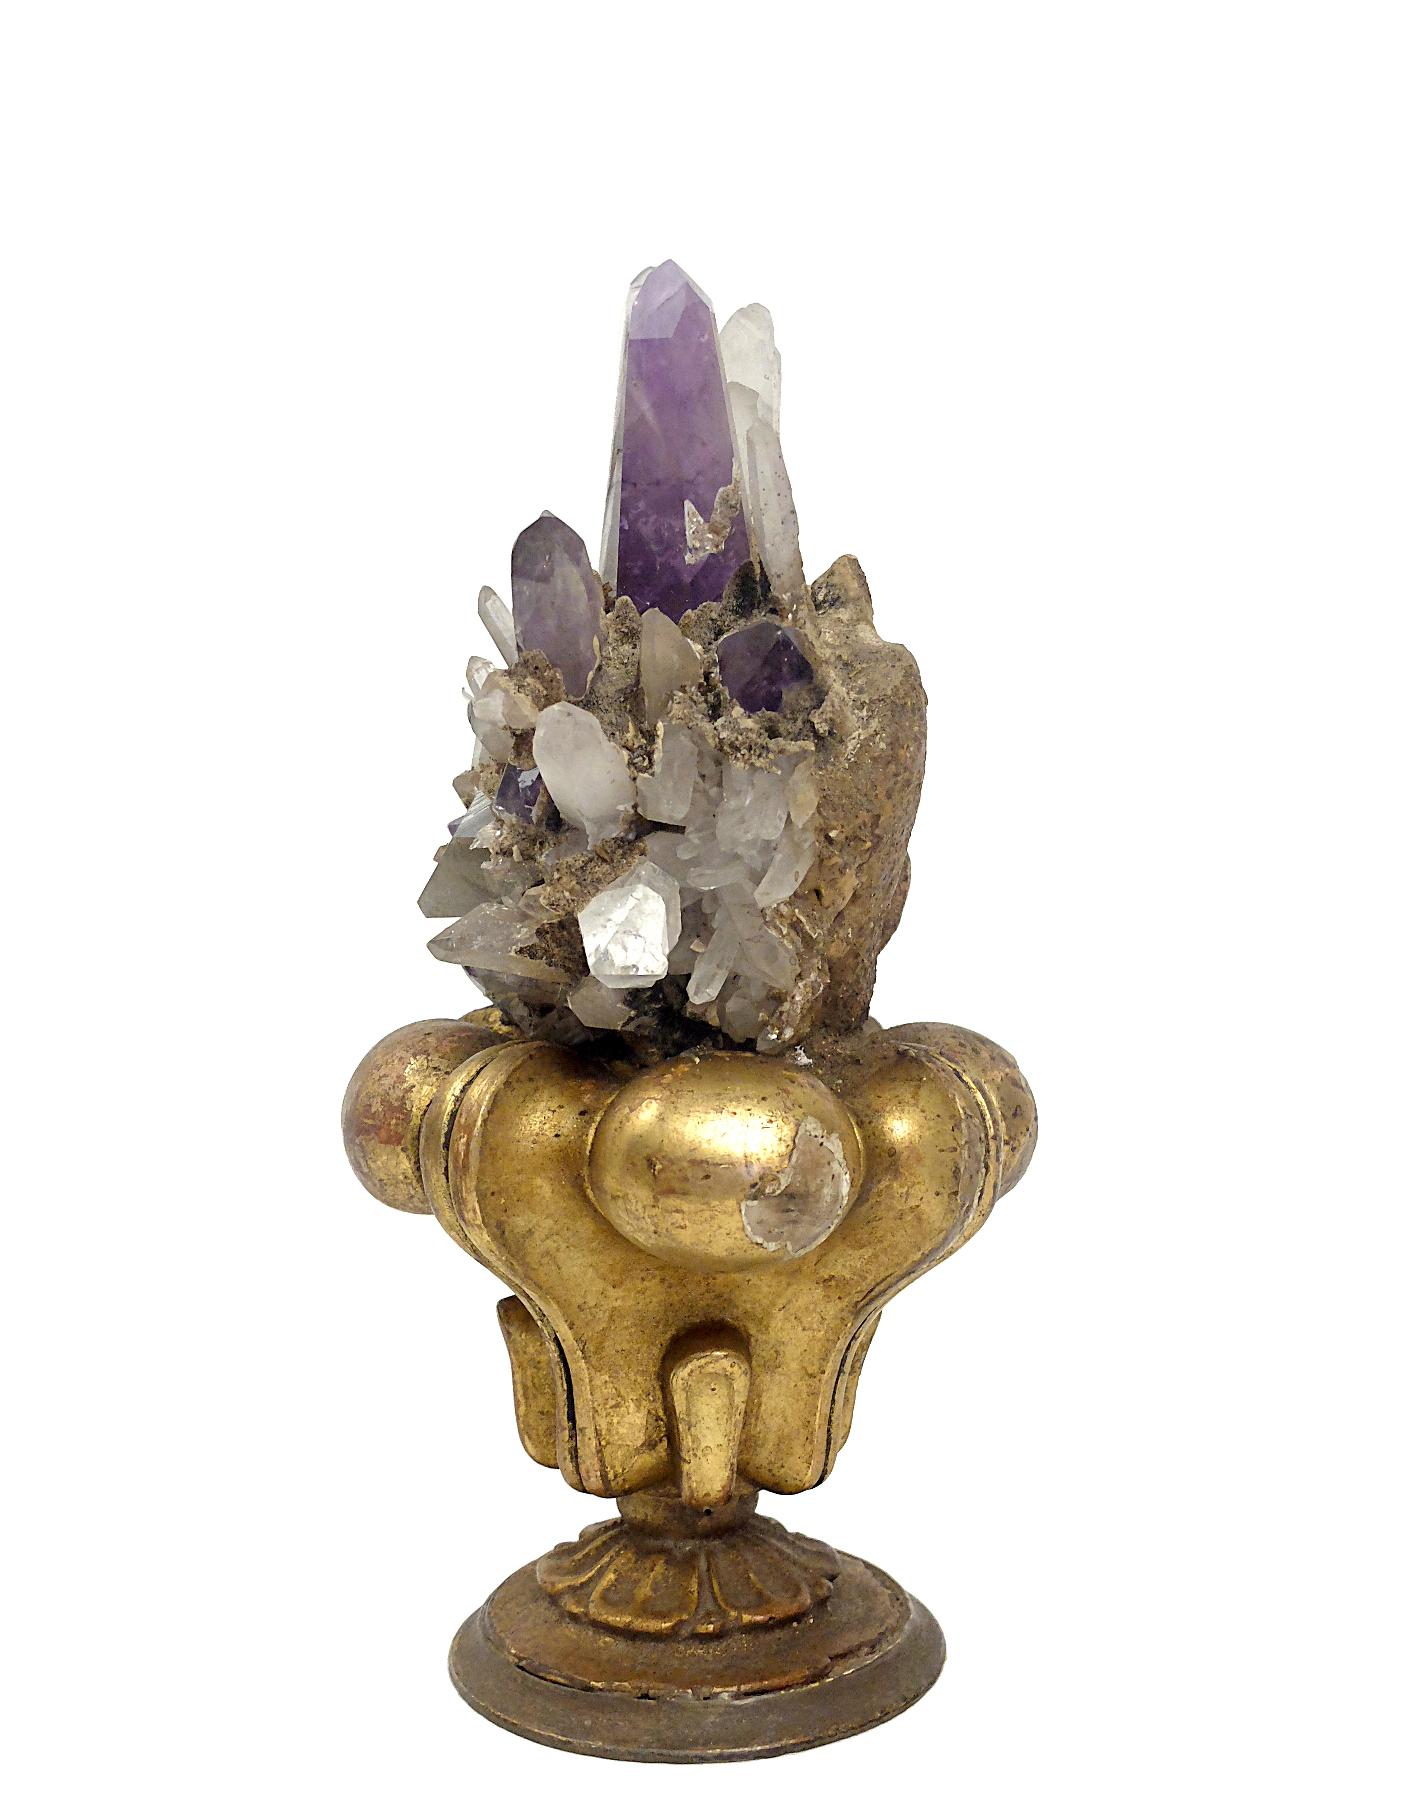 A Naturalia mineral specimen. A Druze of rock crystals and amethyst crystals. The base used to be a palm holder during the Palm Sunday. The crystals samples are mounted over the base surrounded by gilded wooden globular elements. This exceptional